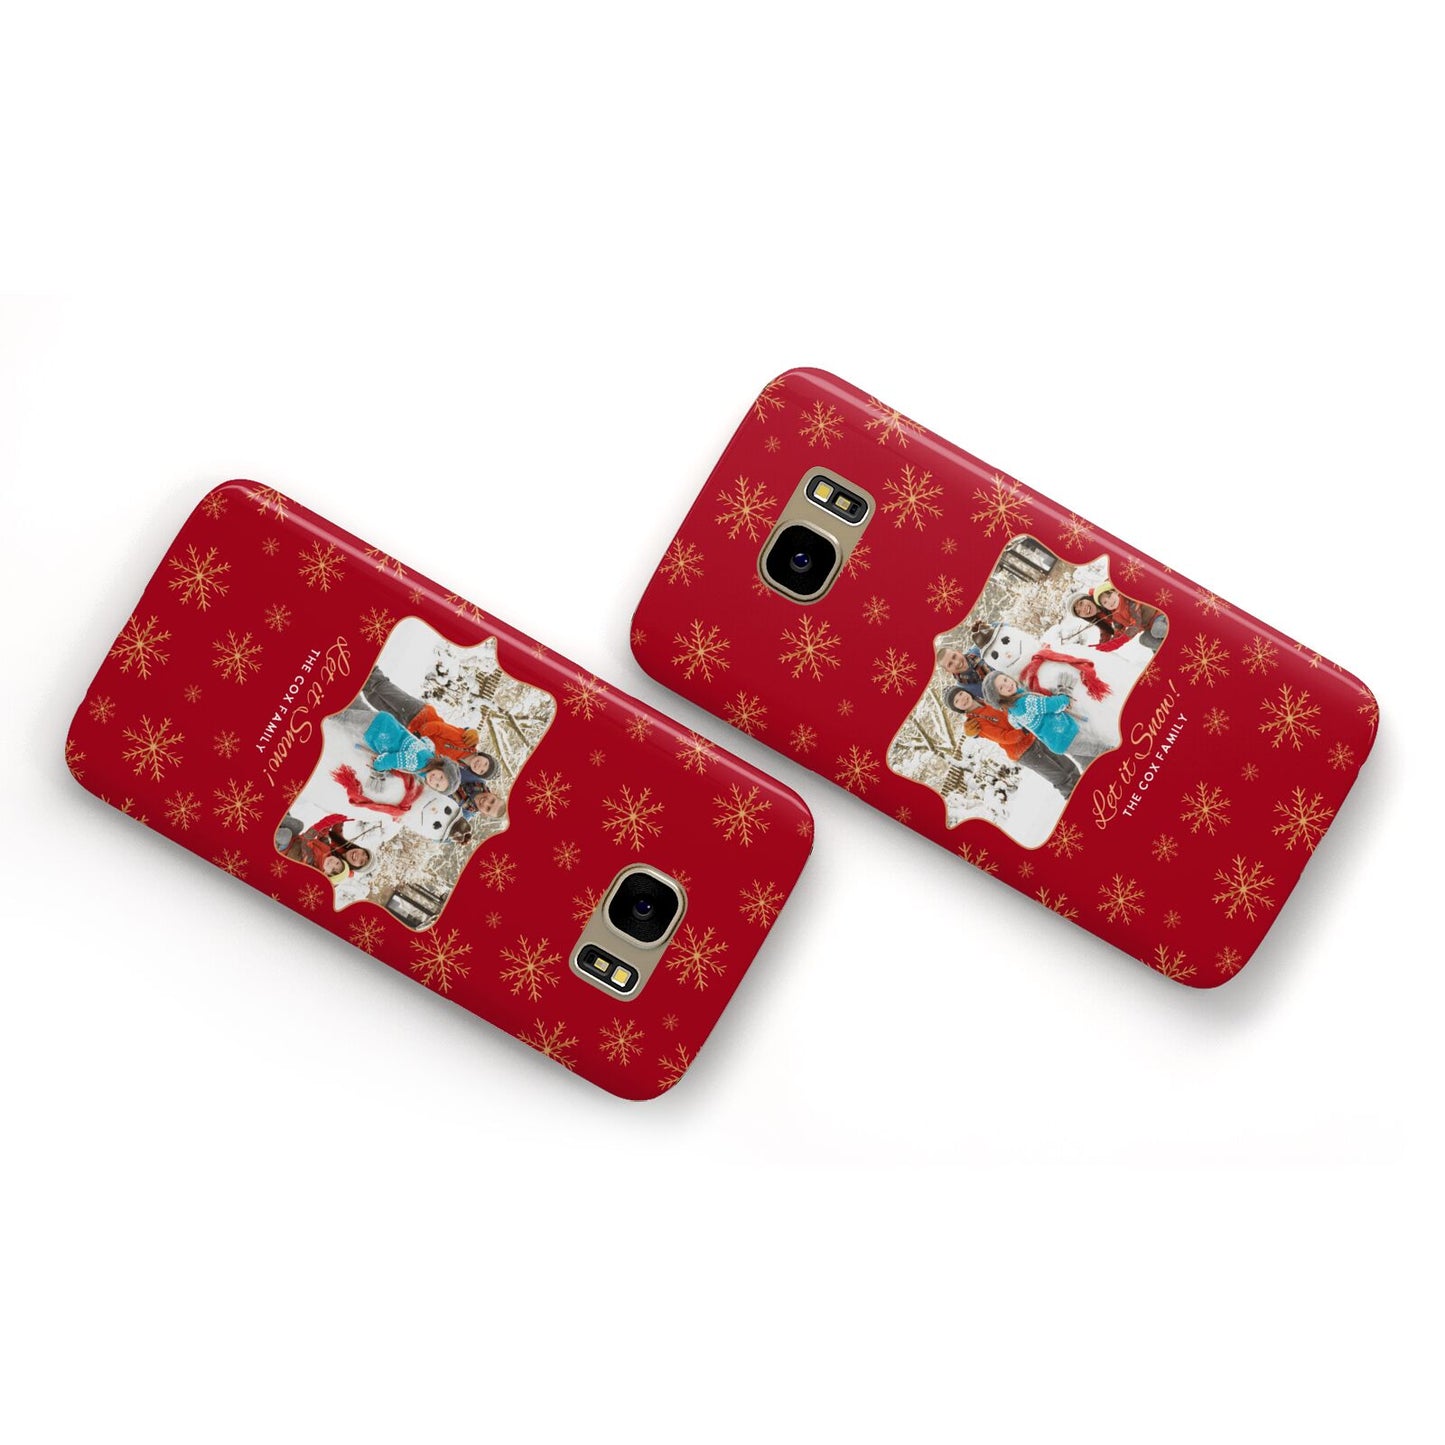 Let it Snow Christmas Photo Upload Samsung Galaxy Case Flat Overview